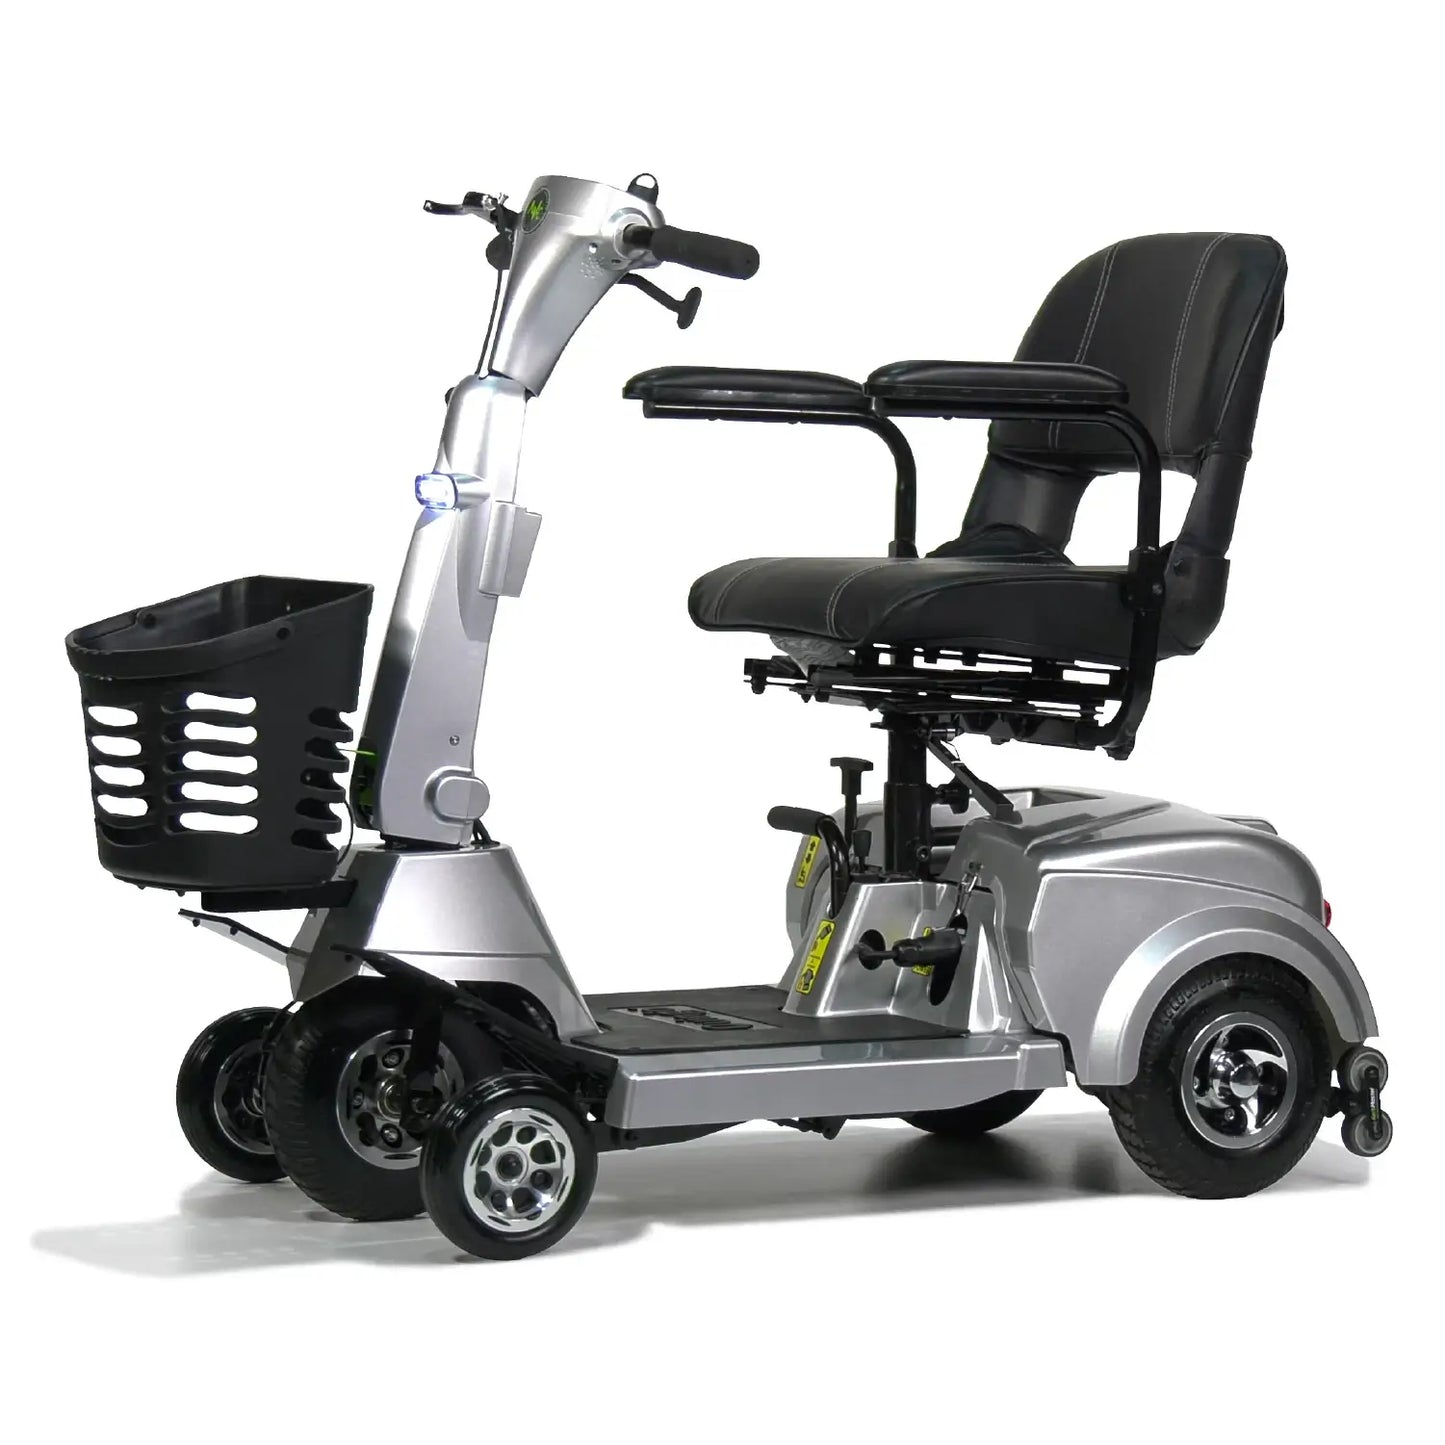 The Quingo Ultra mobility scooter is extremely straightforward to transport and is very easy to dismantle,